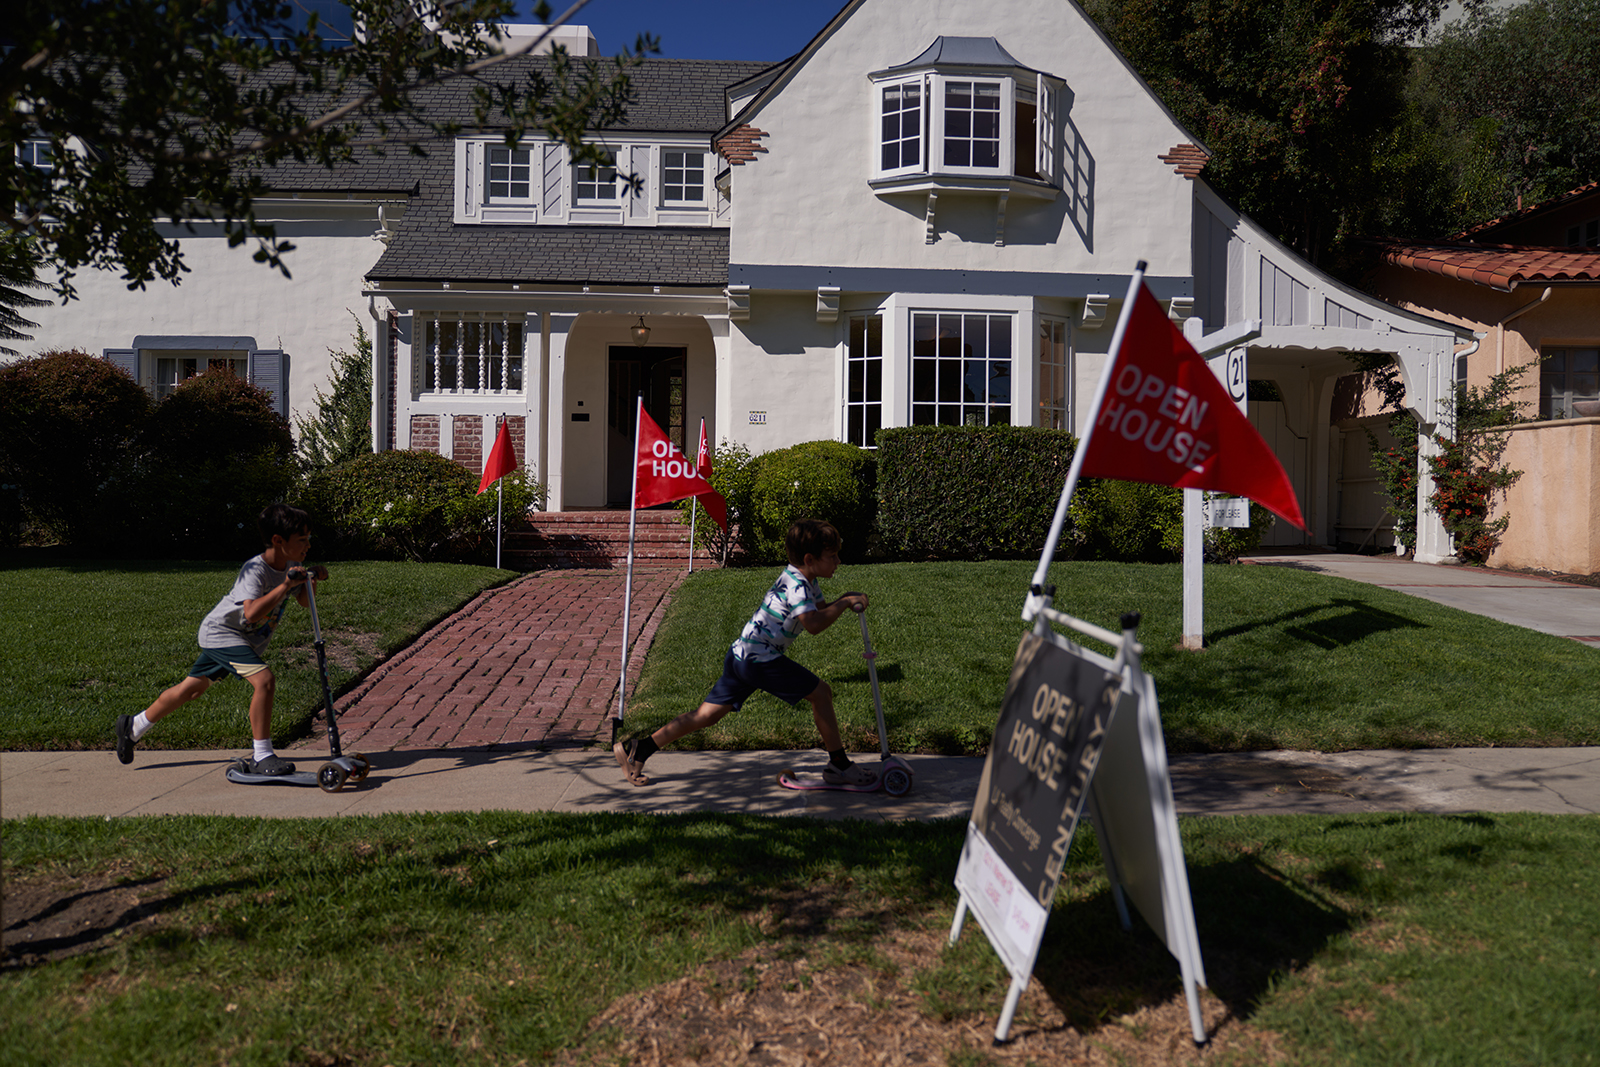 'Open house' flags are displayed outside a single family home on September 22, 2022 in Los Angeles, California. 